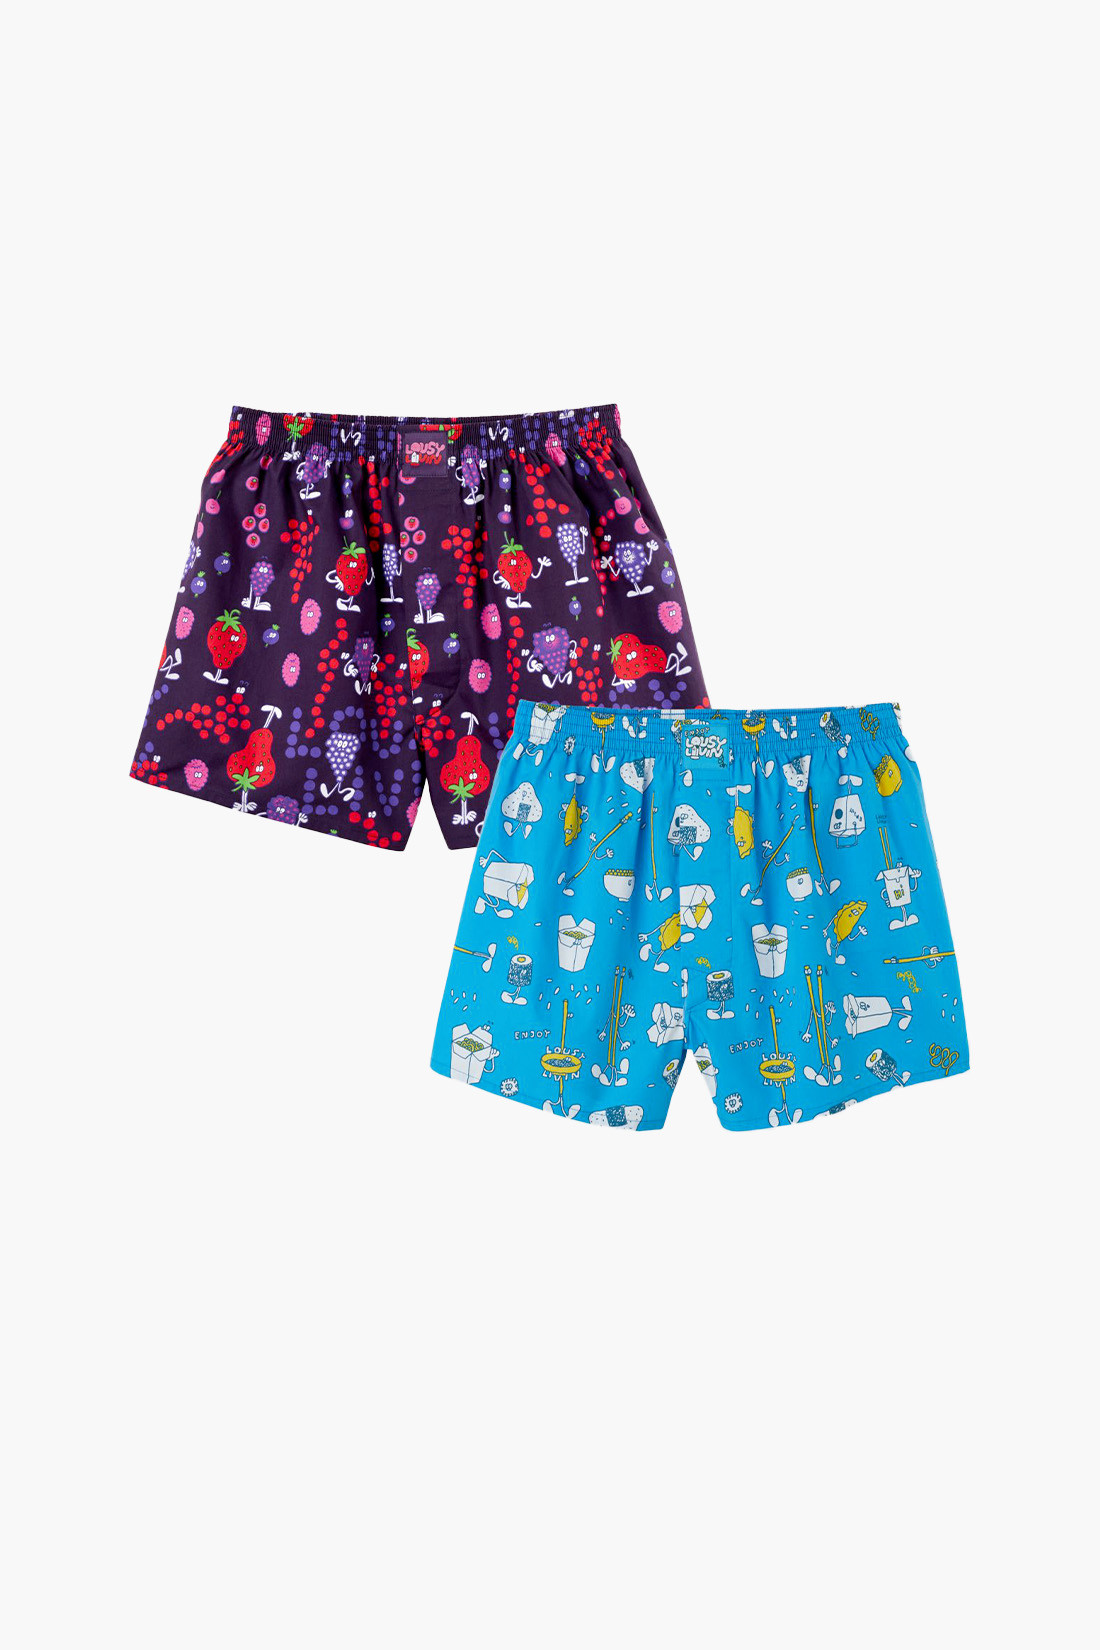 Boxer shorts berry & lunchbox Navy/blue